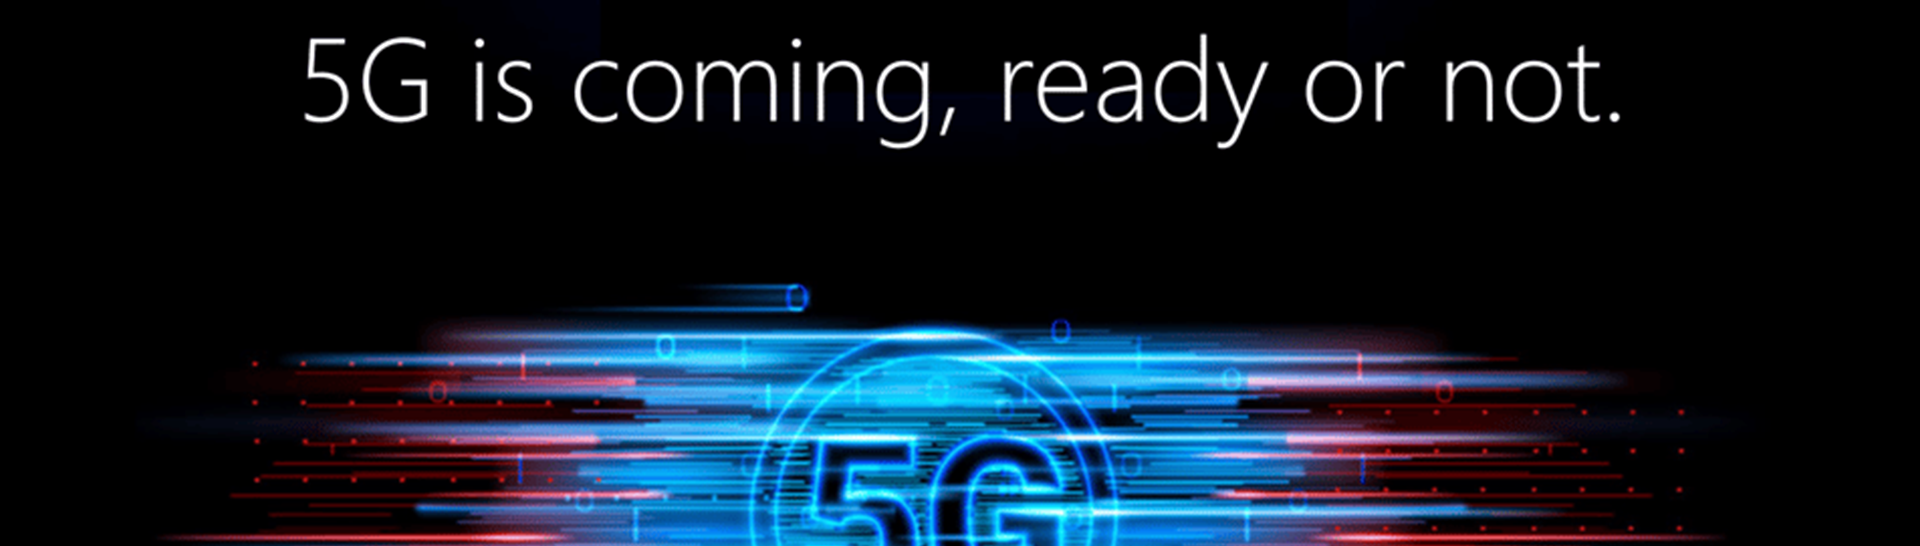 7 steps to prepare for 5g resized